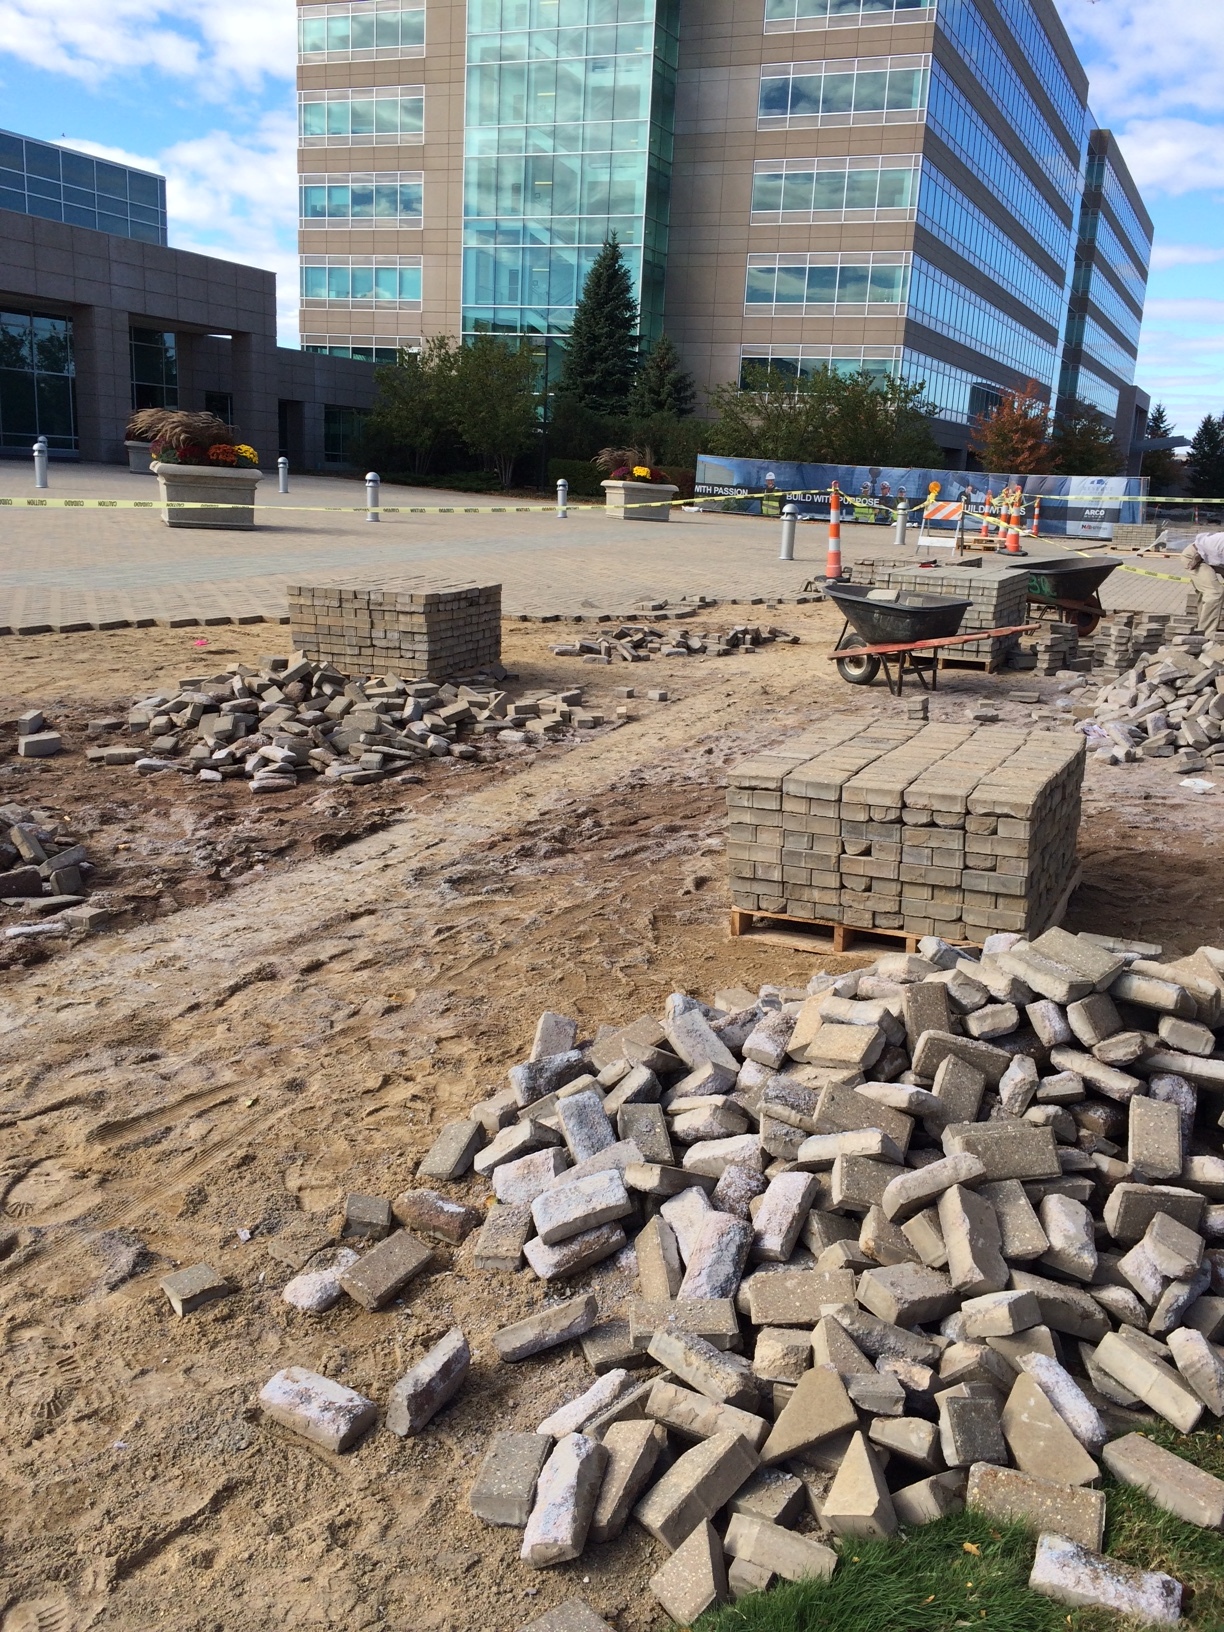 Removal of pavers from plaza for new drive lane